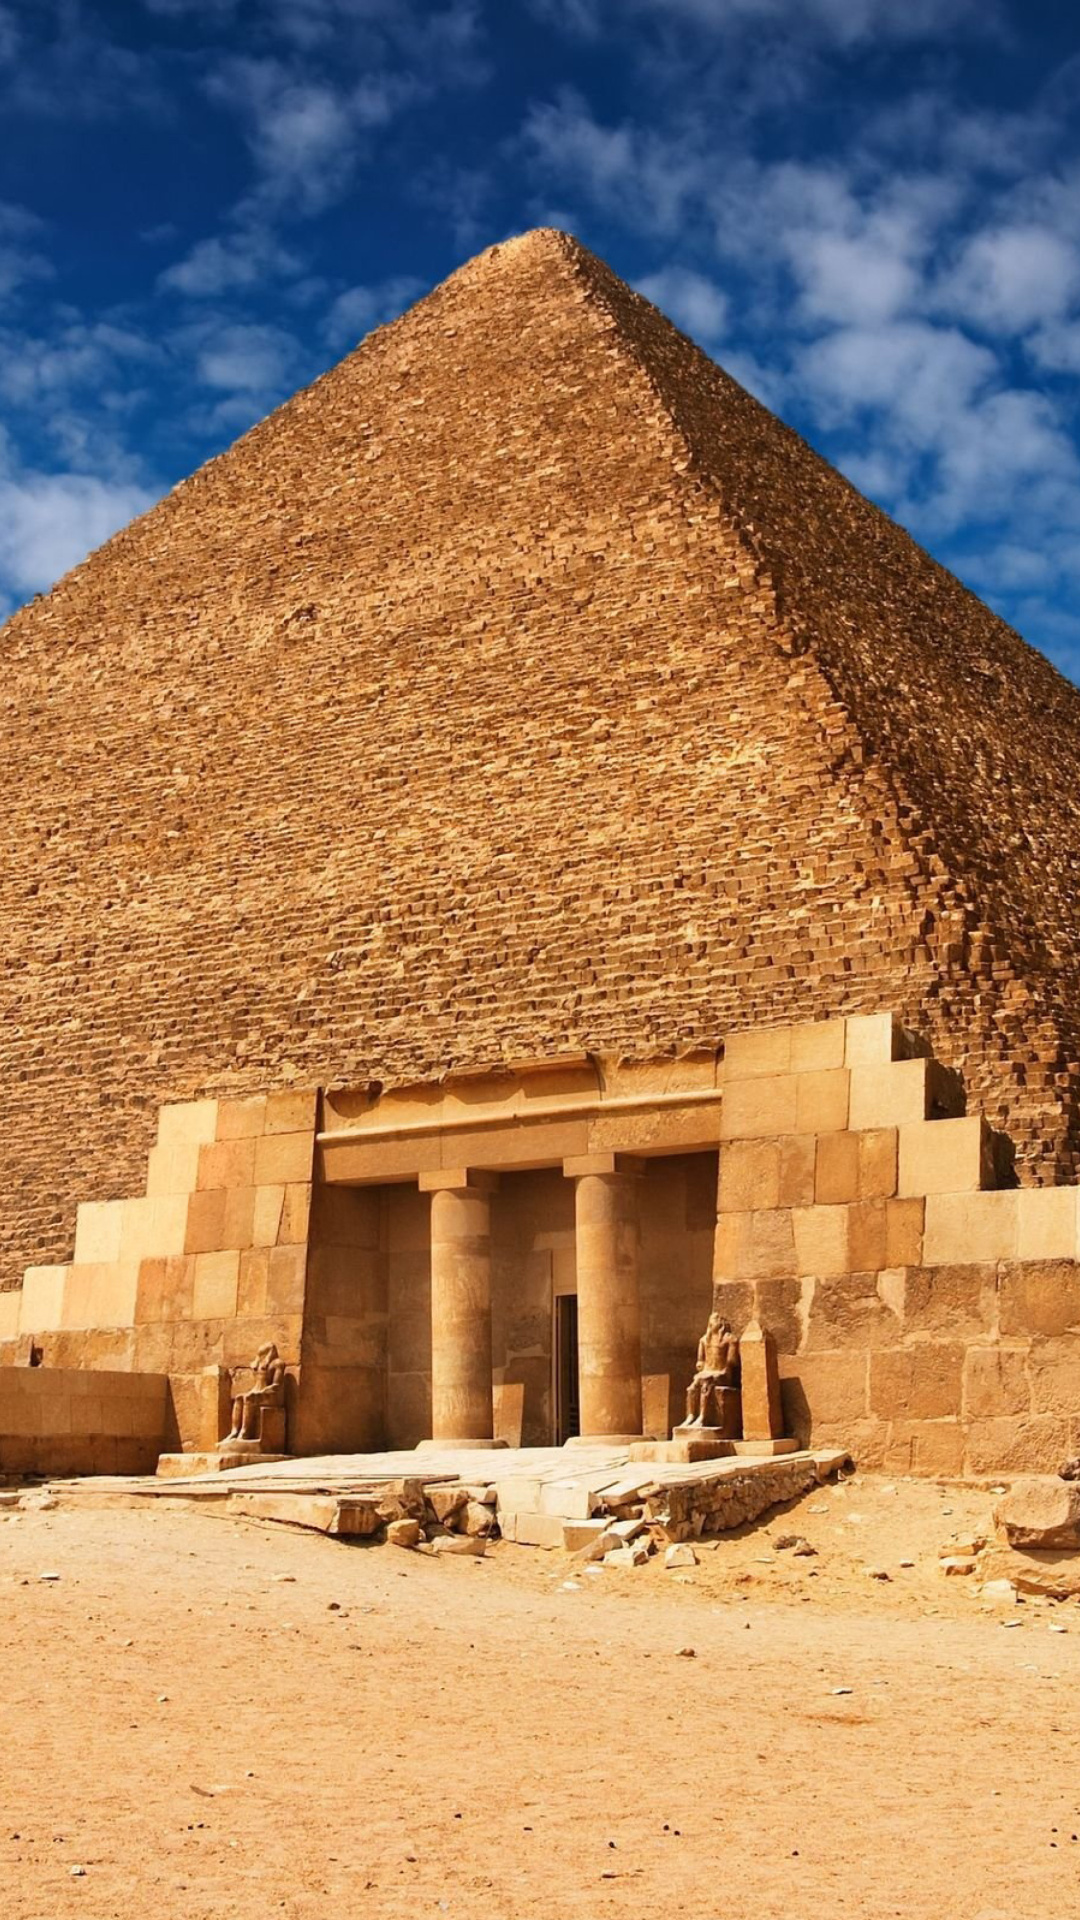 Great Pyramid of Giza in Egypt wallpaper 1080x1920